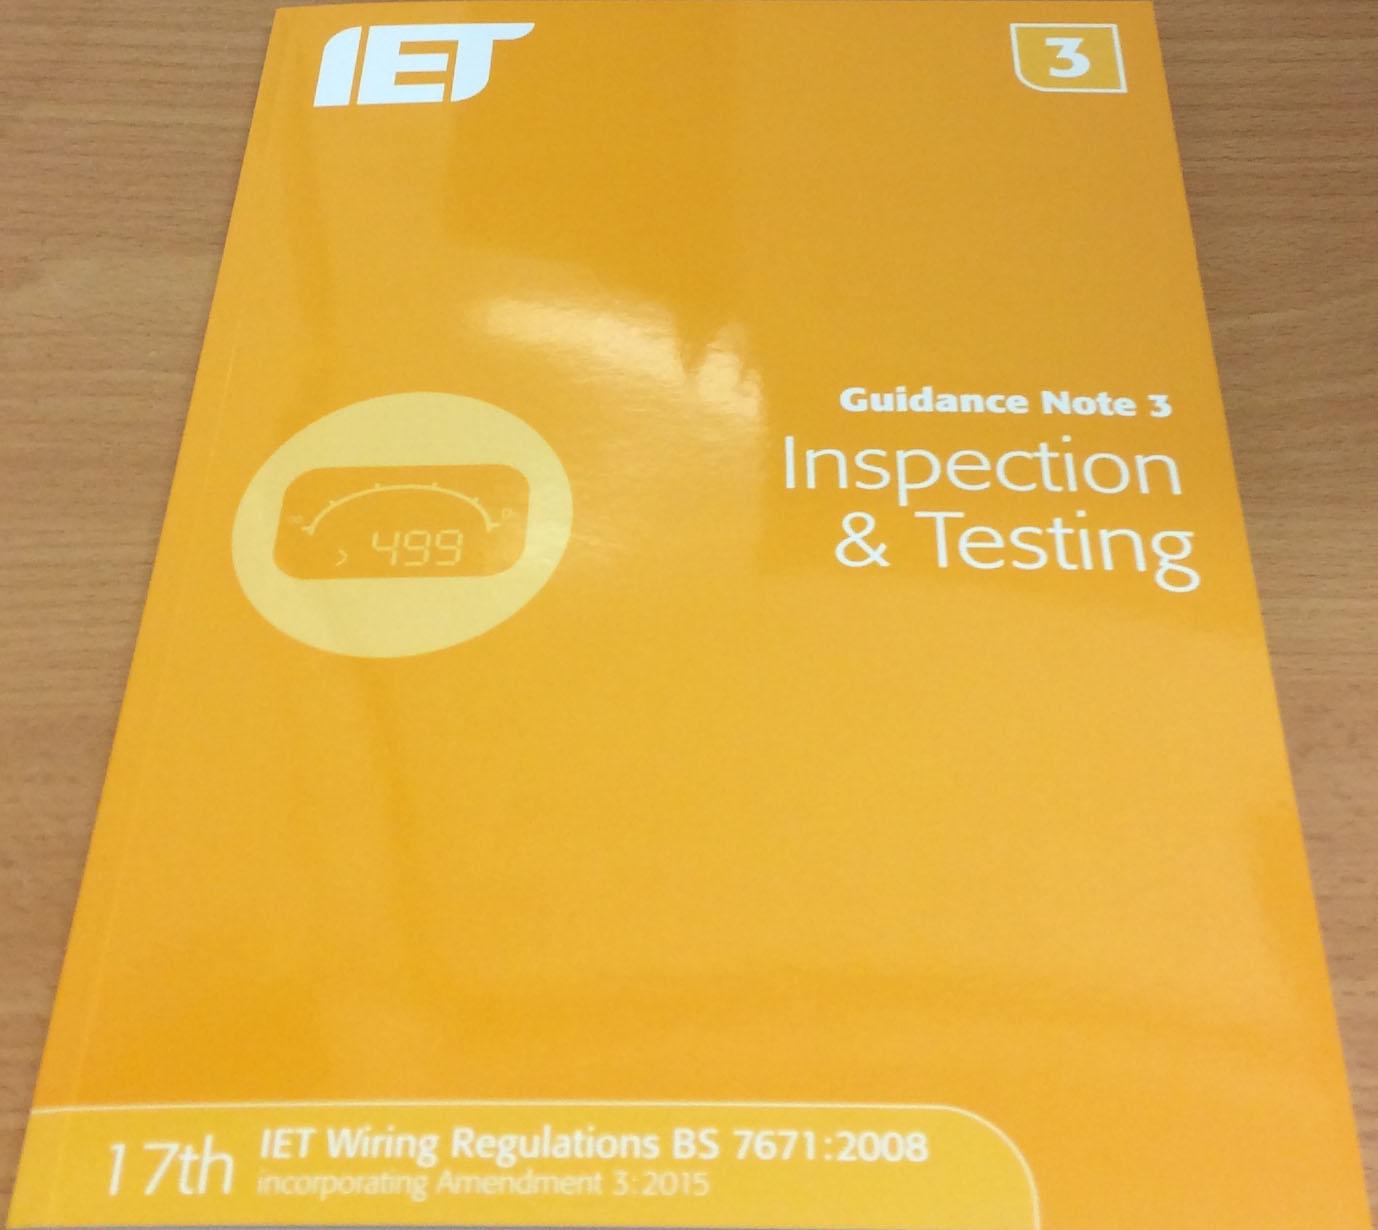 New Inspection & Testing